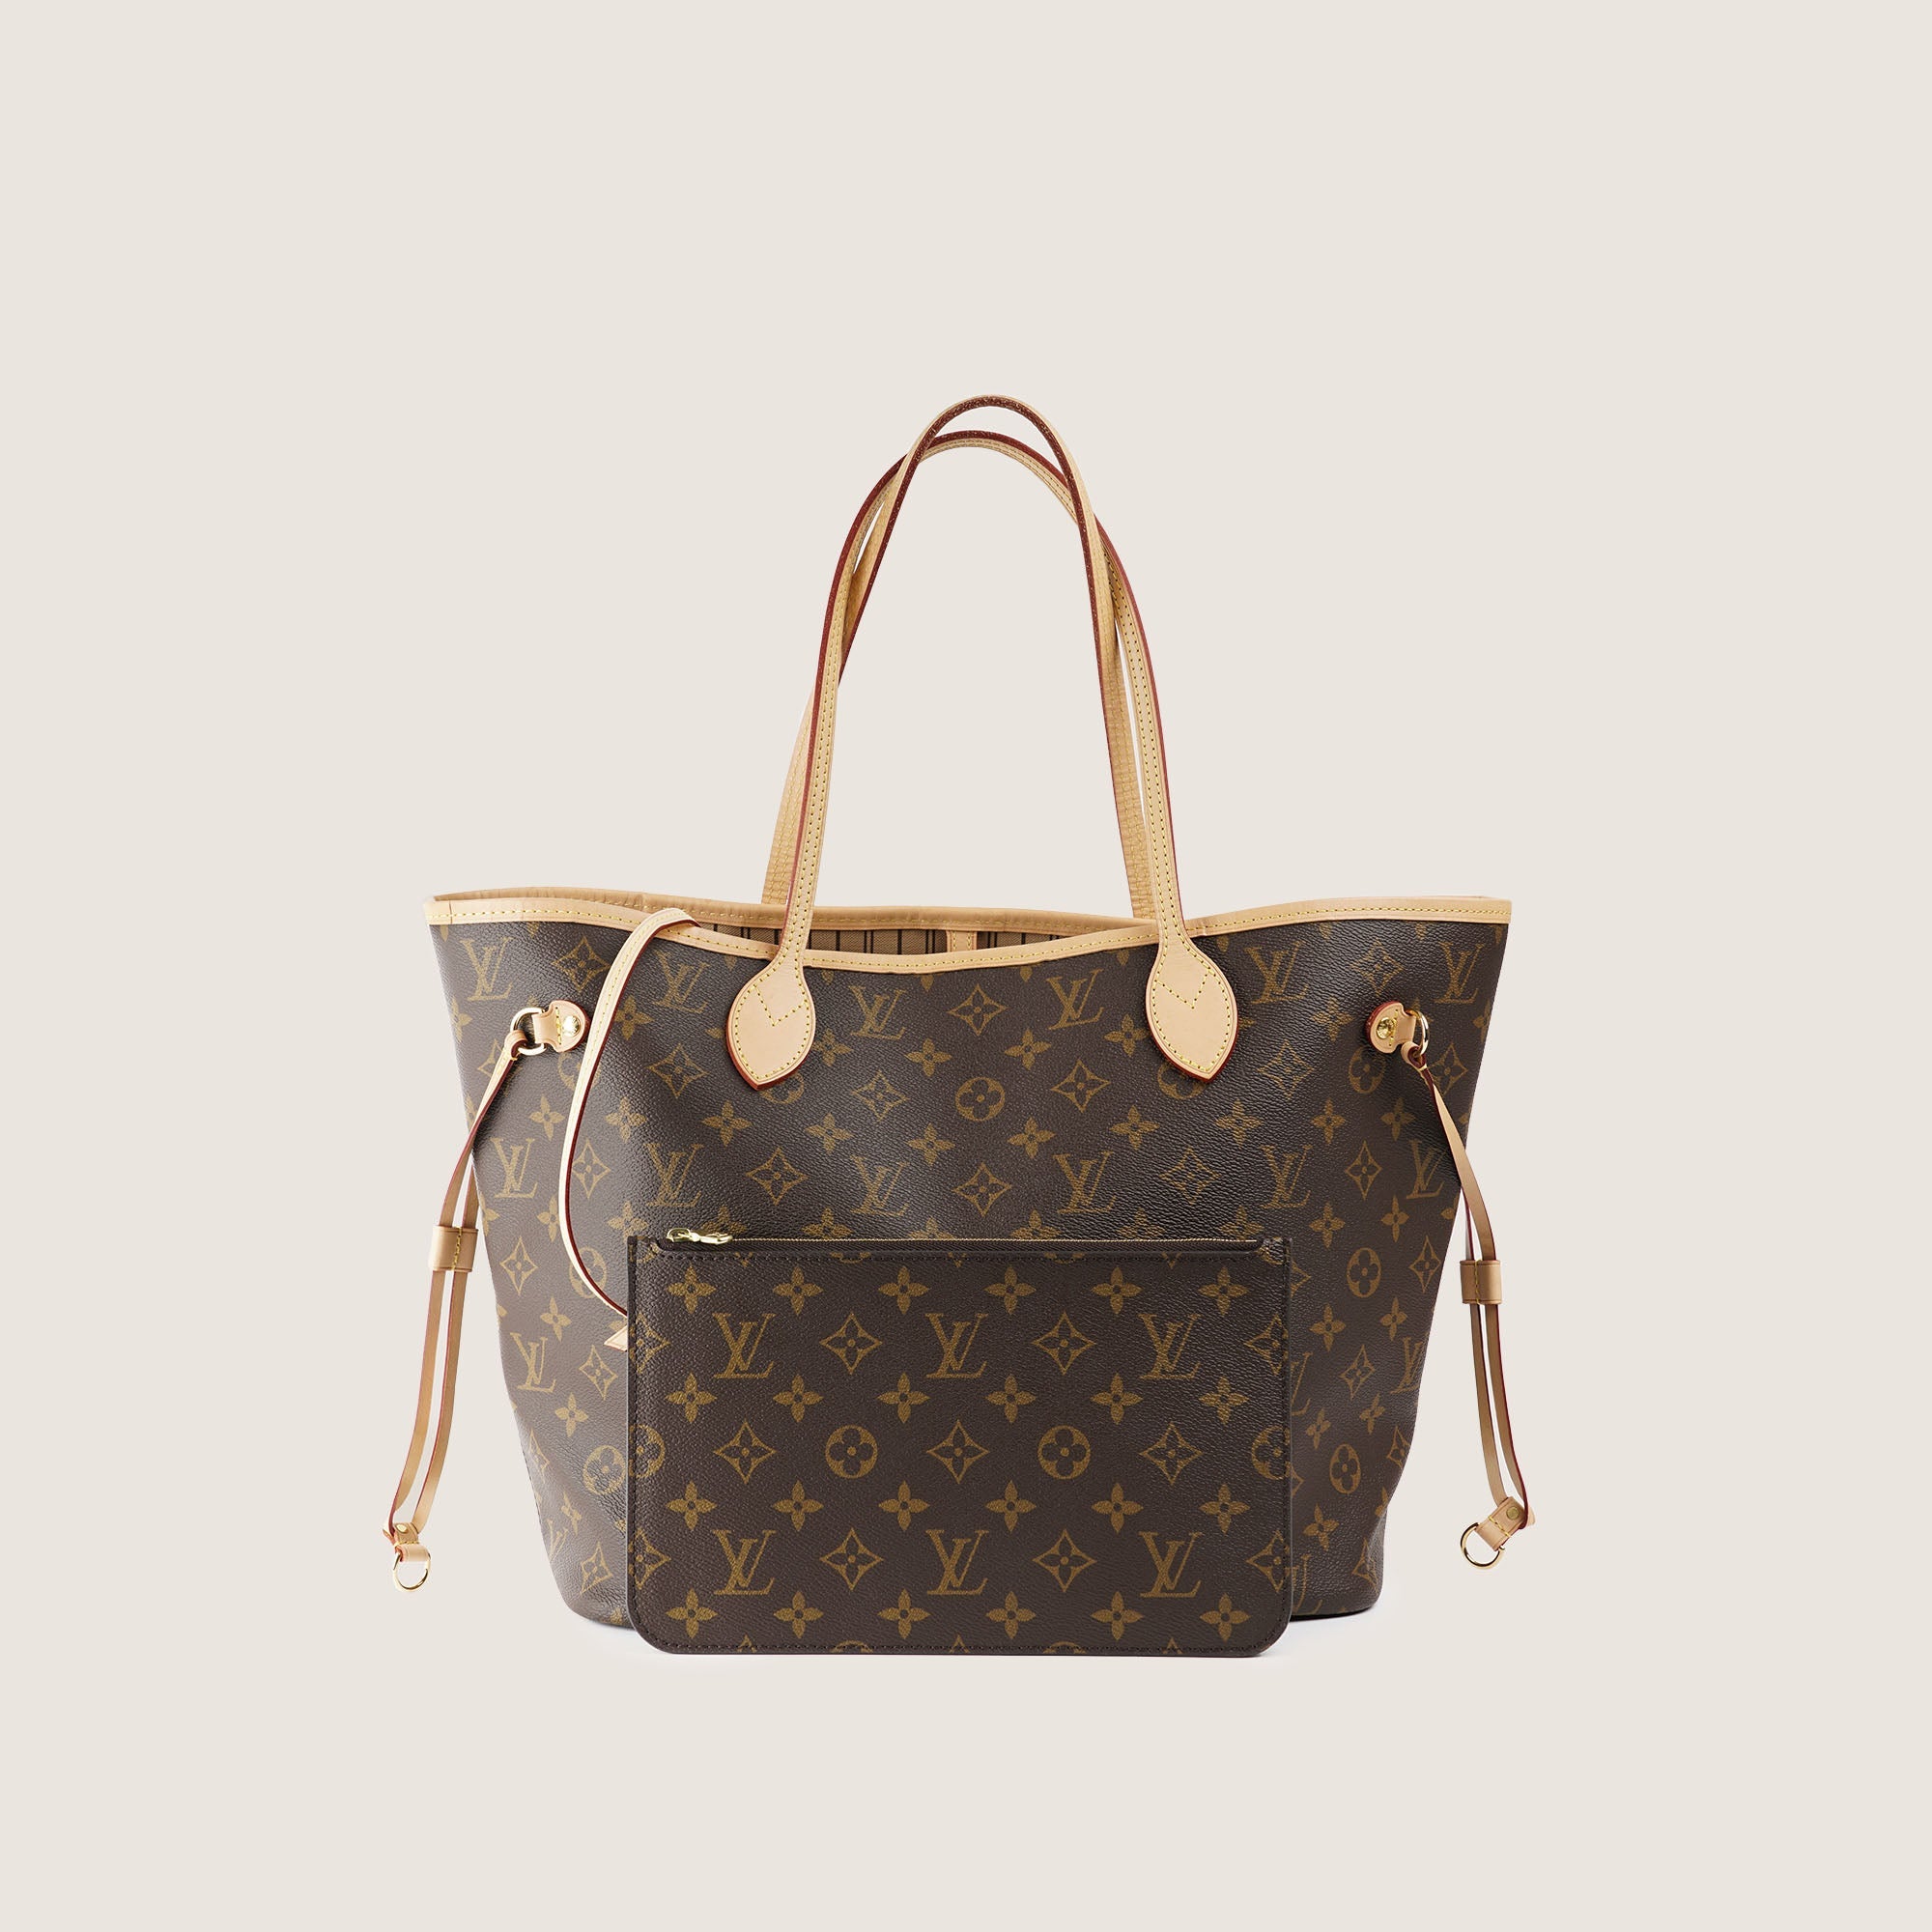 Neverfull MM Monogram - LOUIS VUITTON - Affordable Luxury image